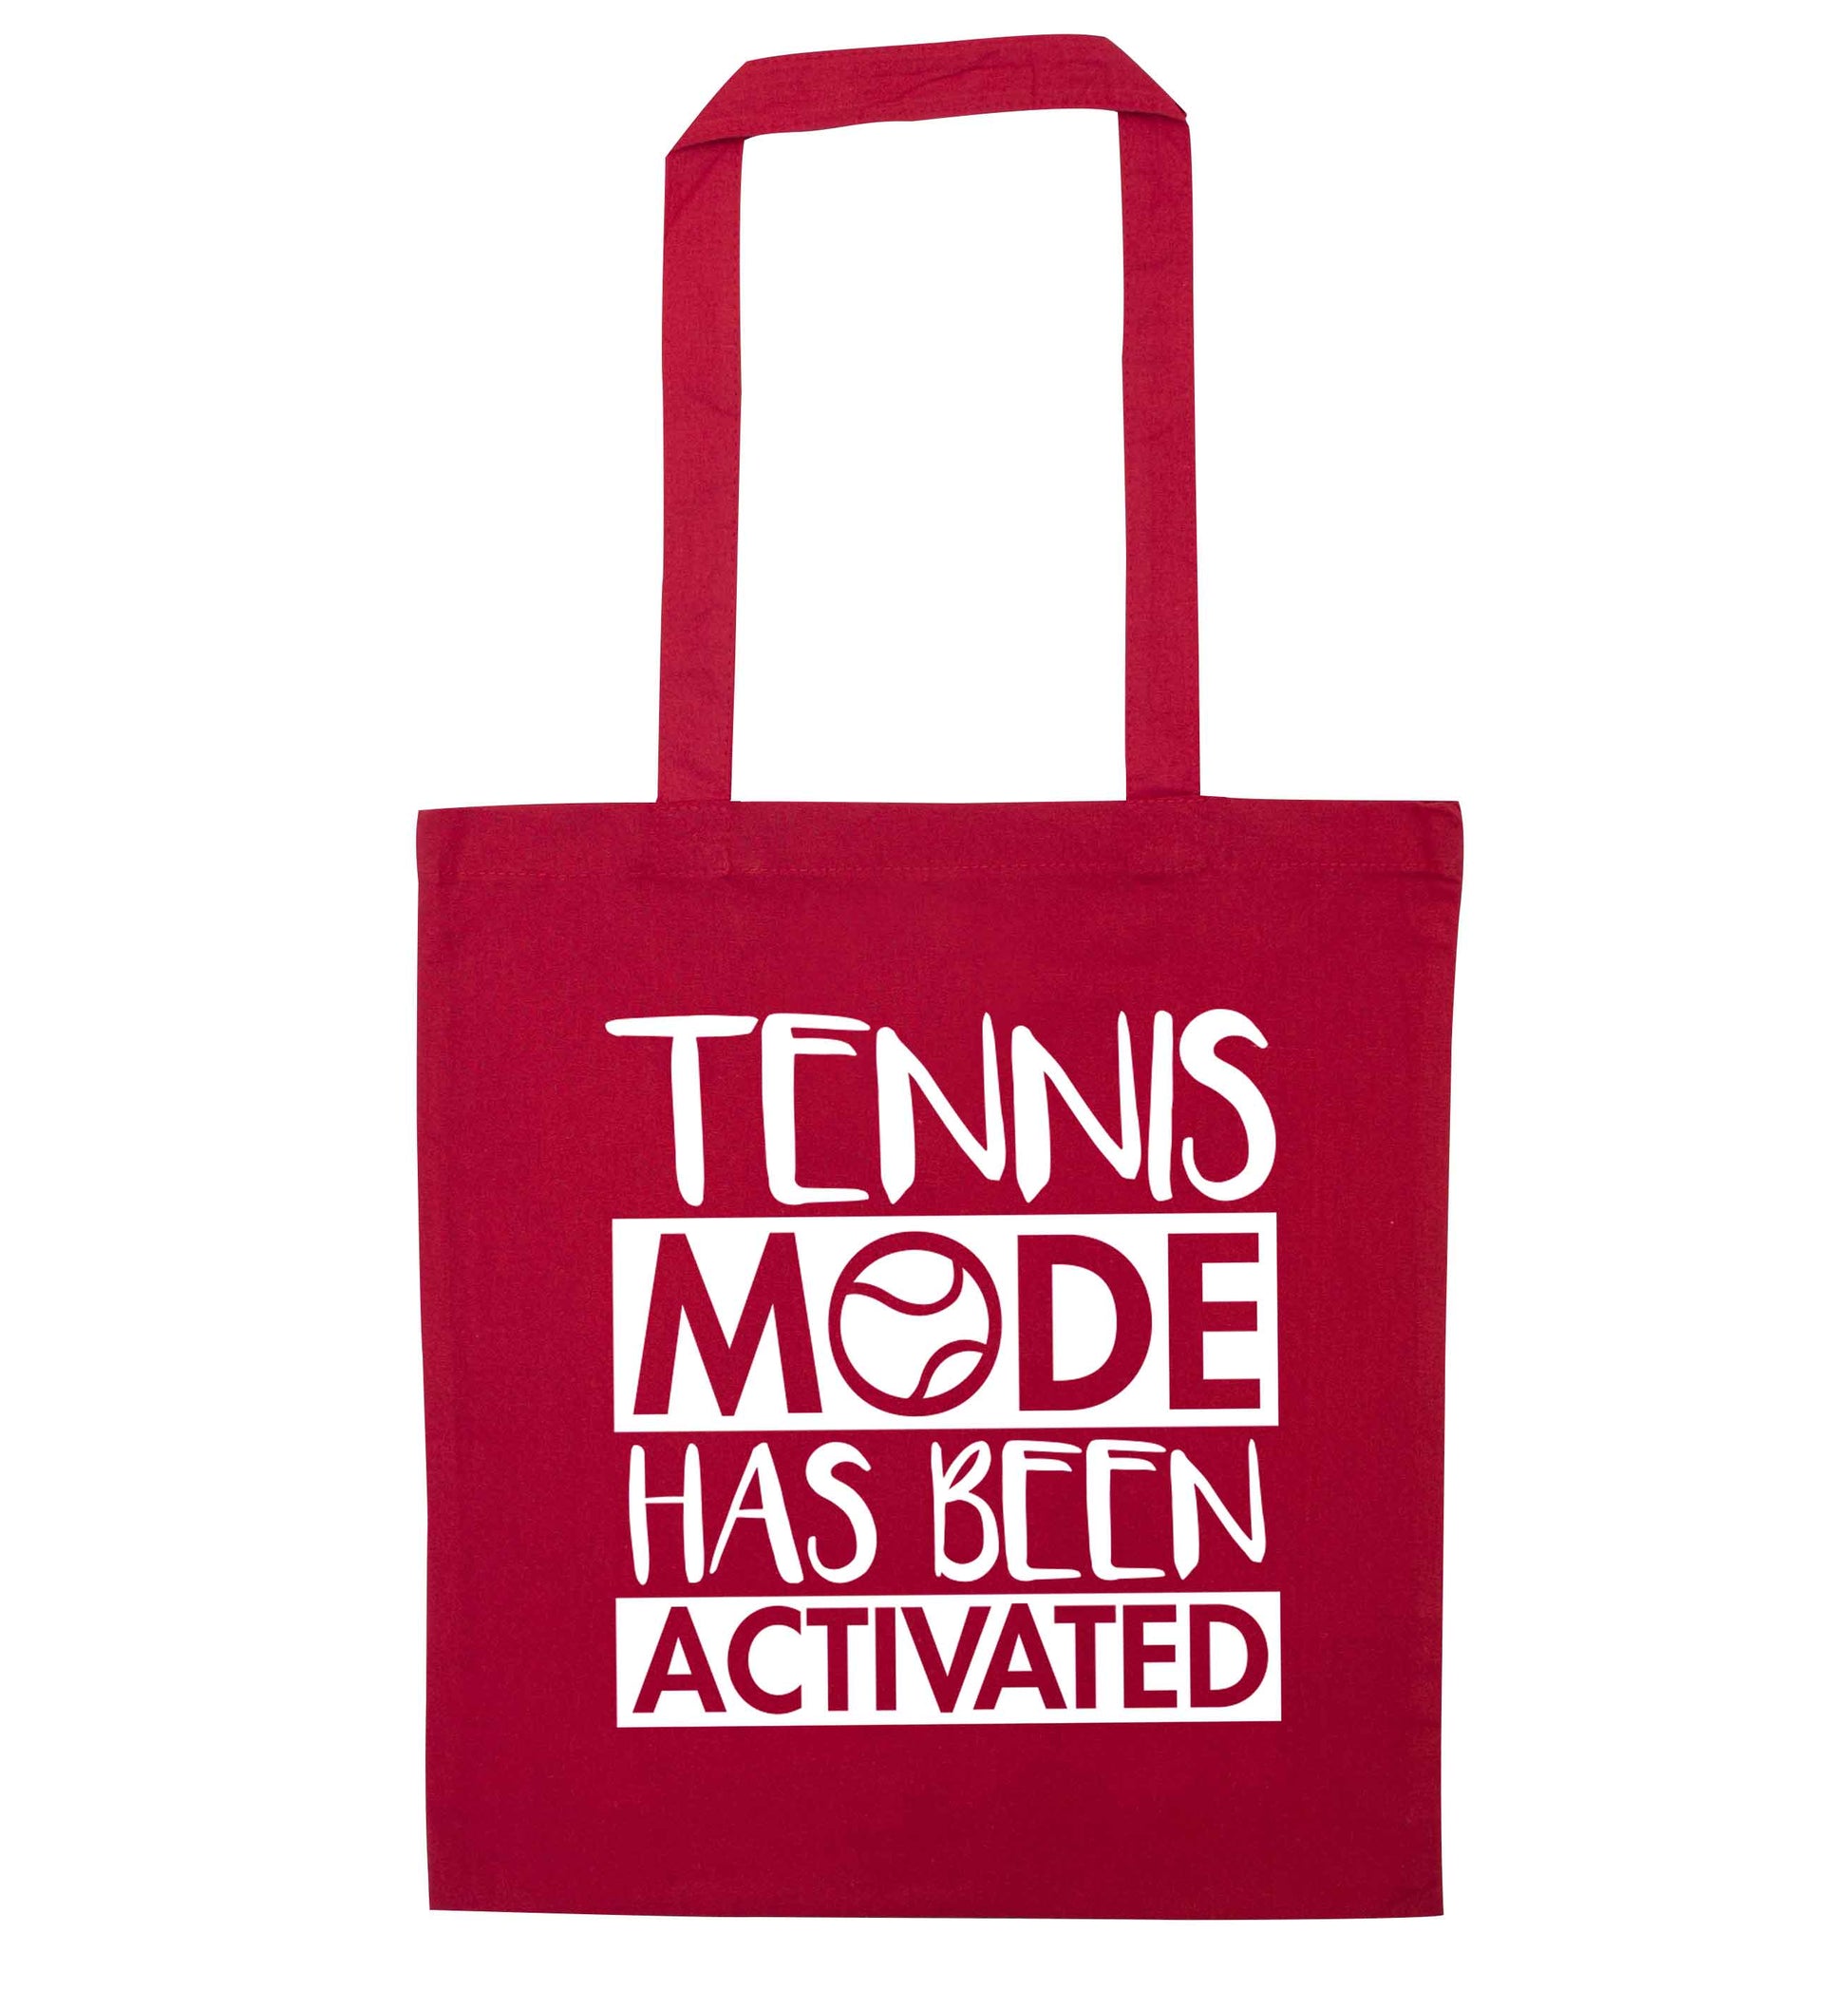 Tennis mode has been activated red tote bag